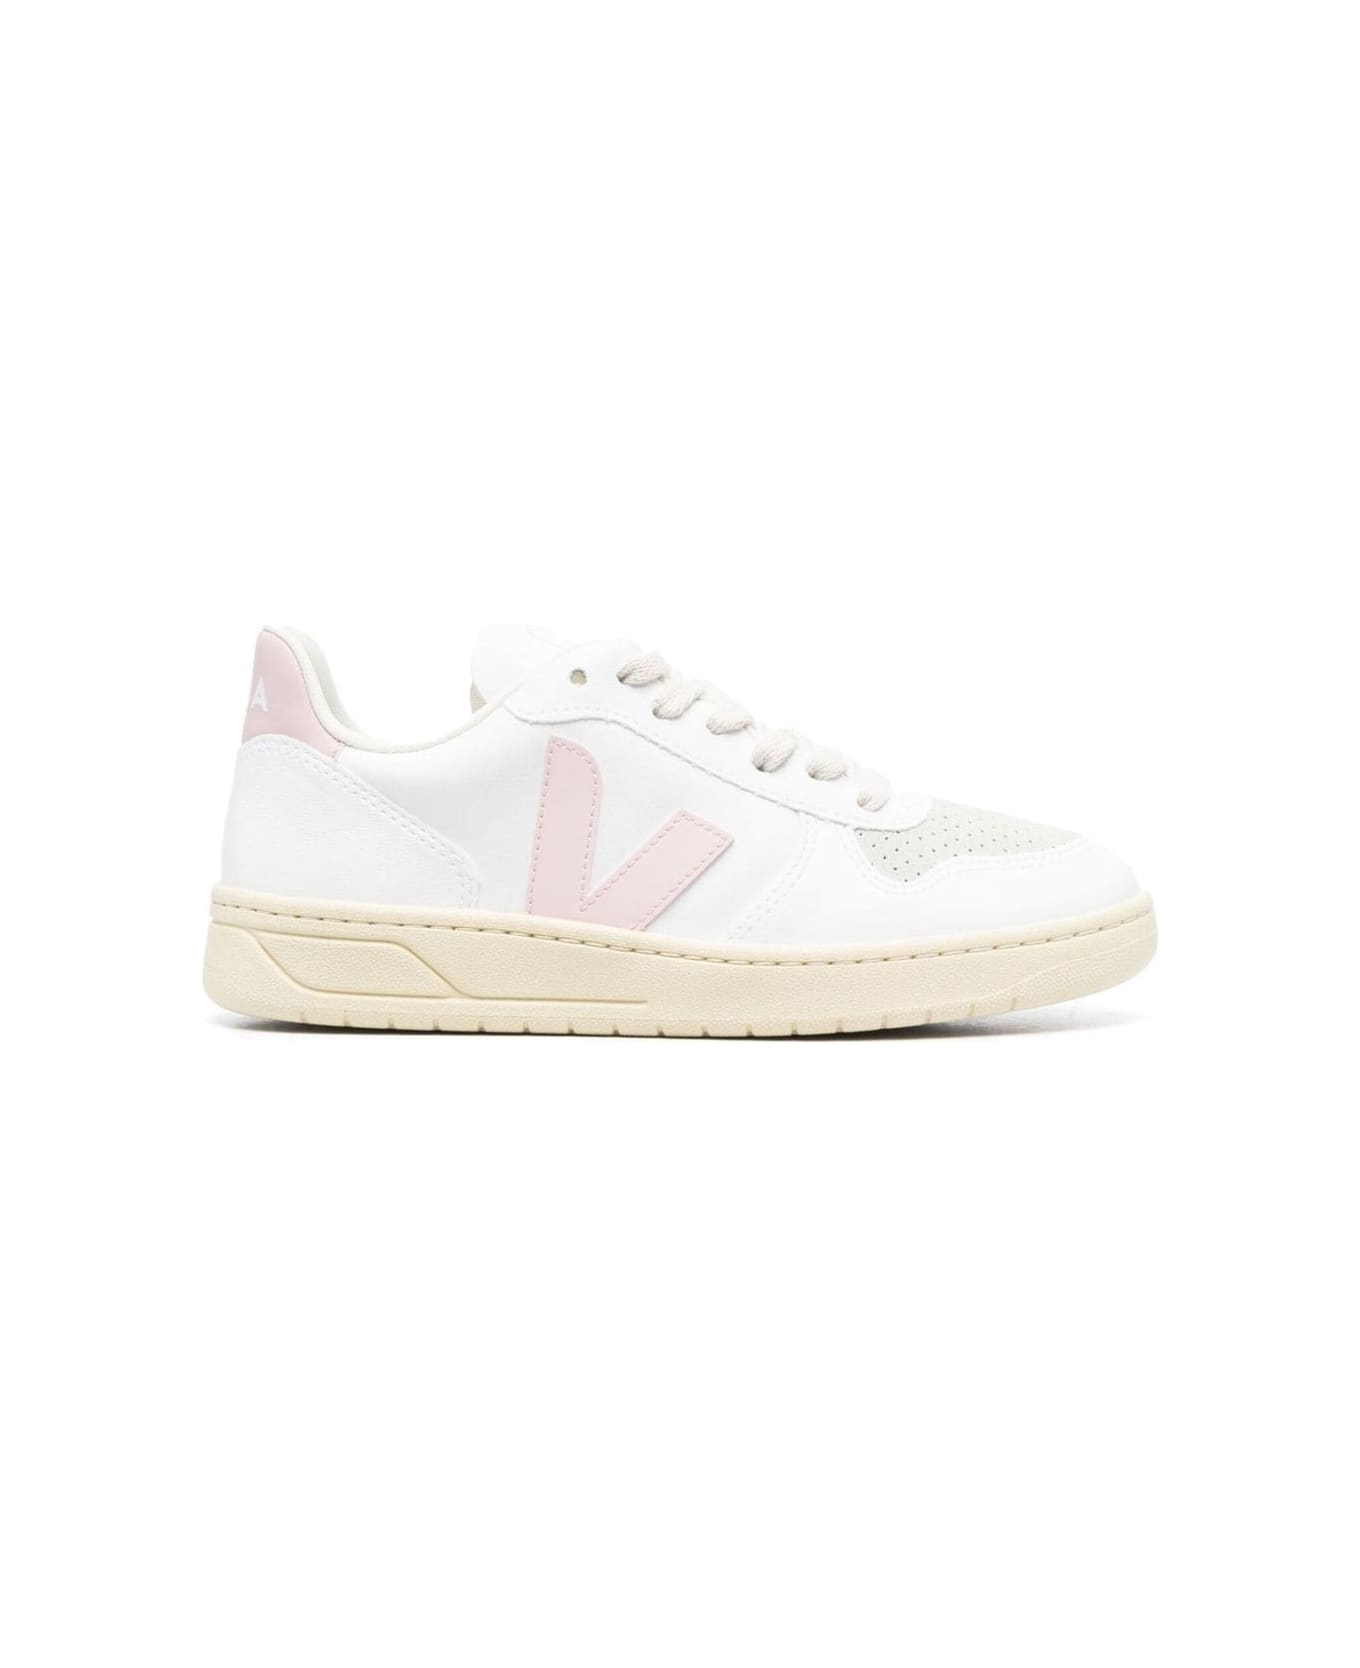 Veja Sneakers V-10 With Logo In White And Pink Leather Woman - White スニーカー